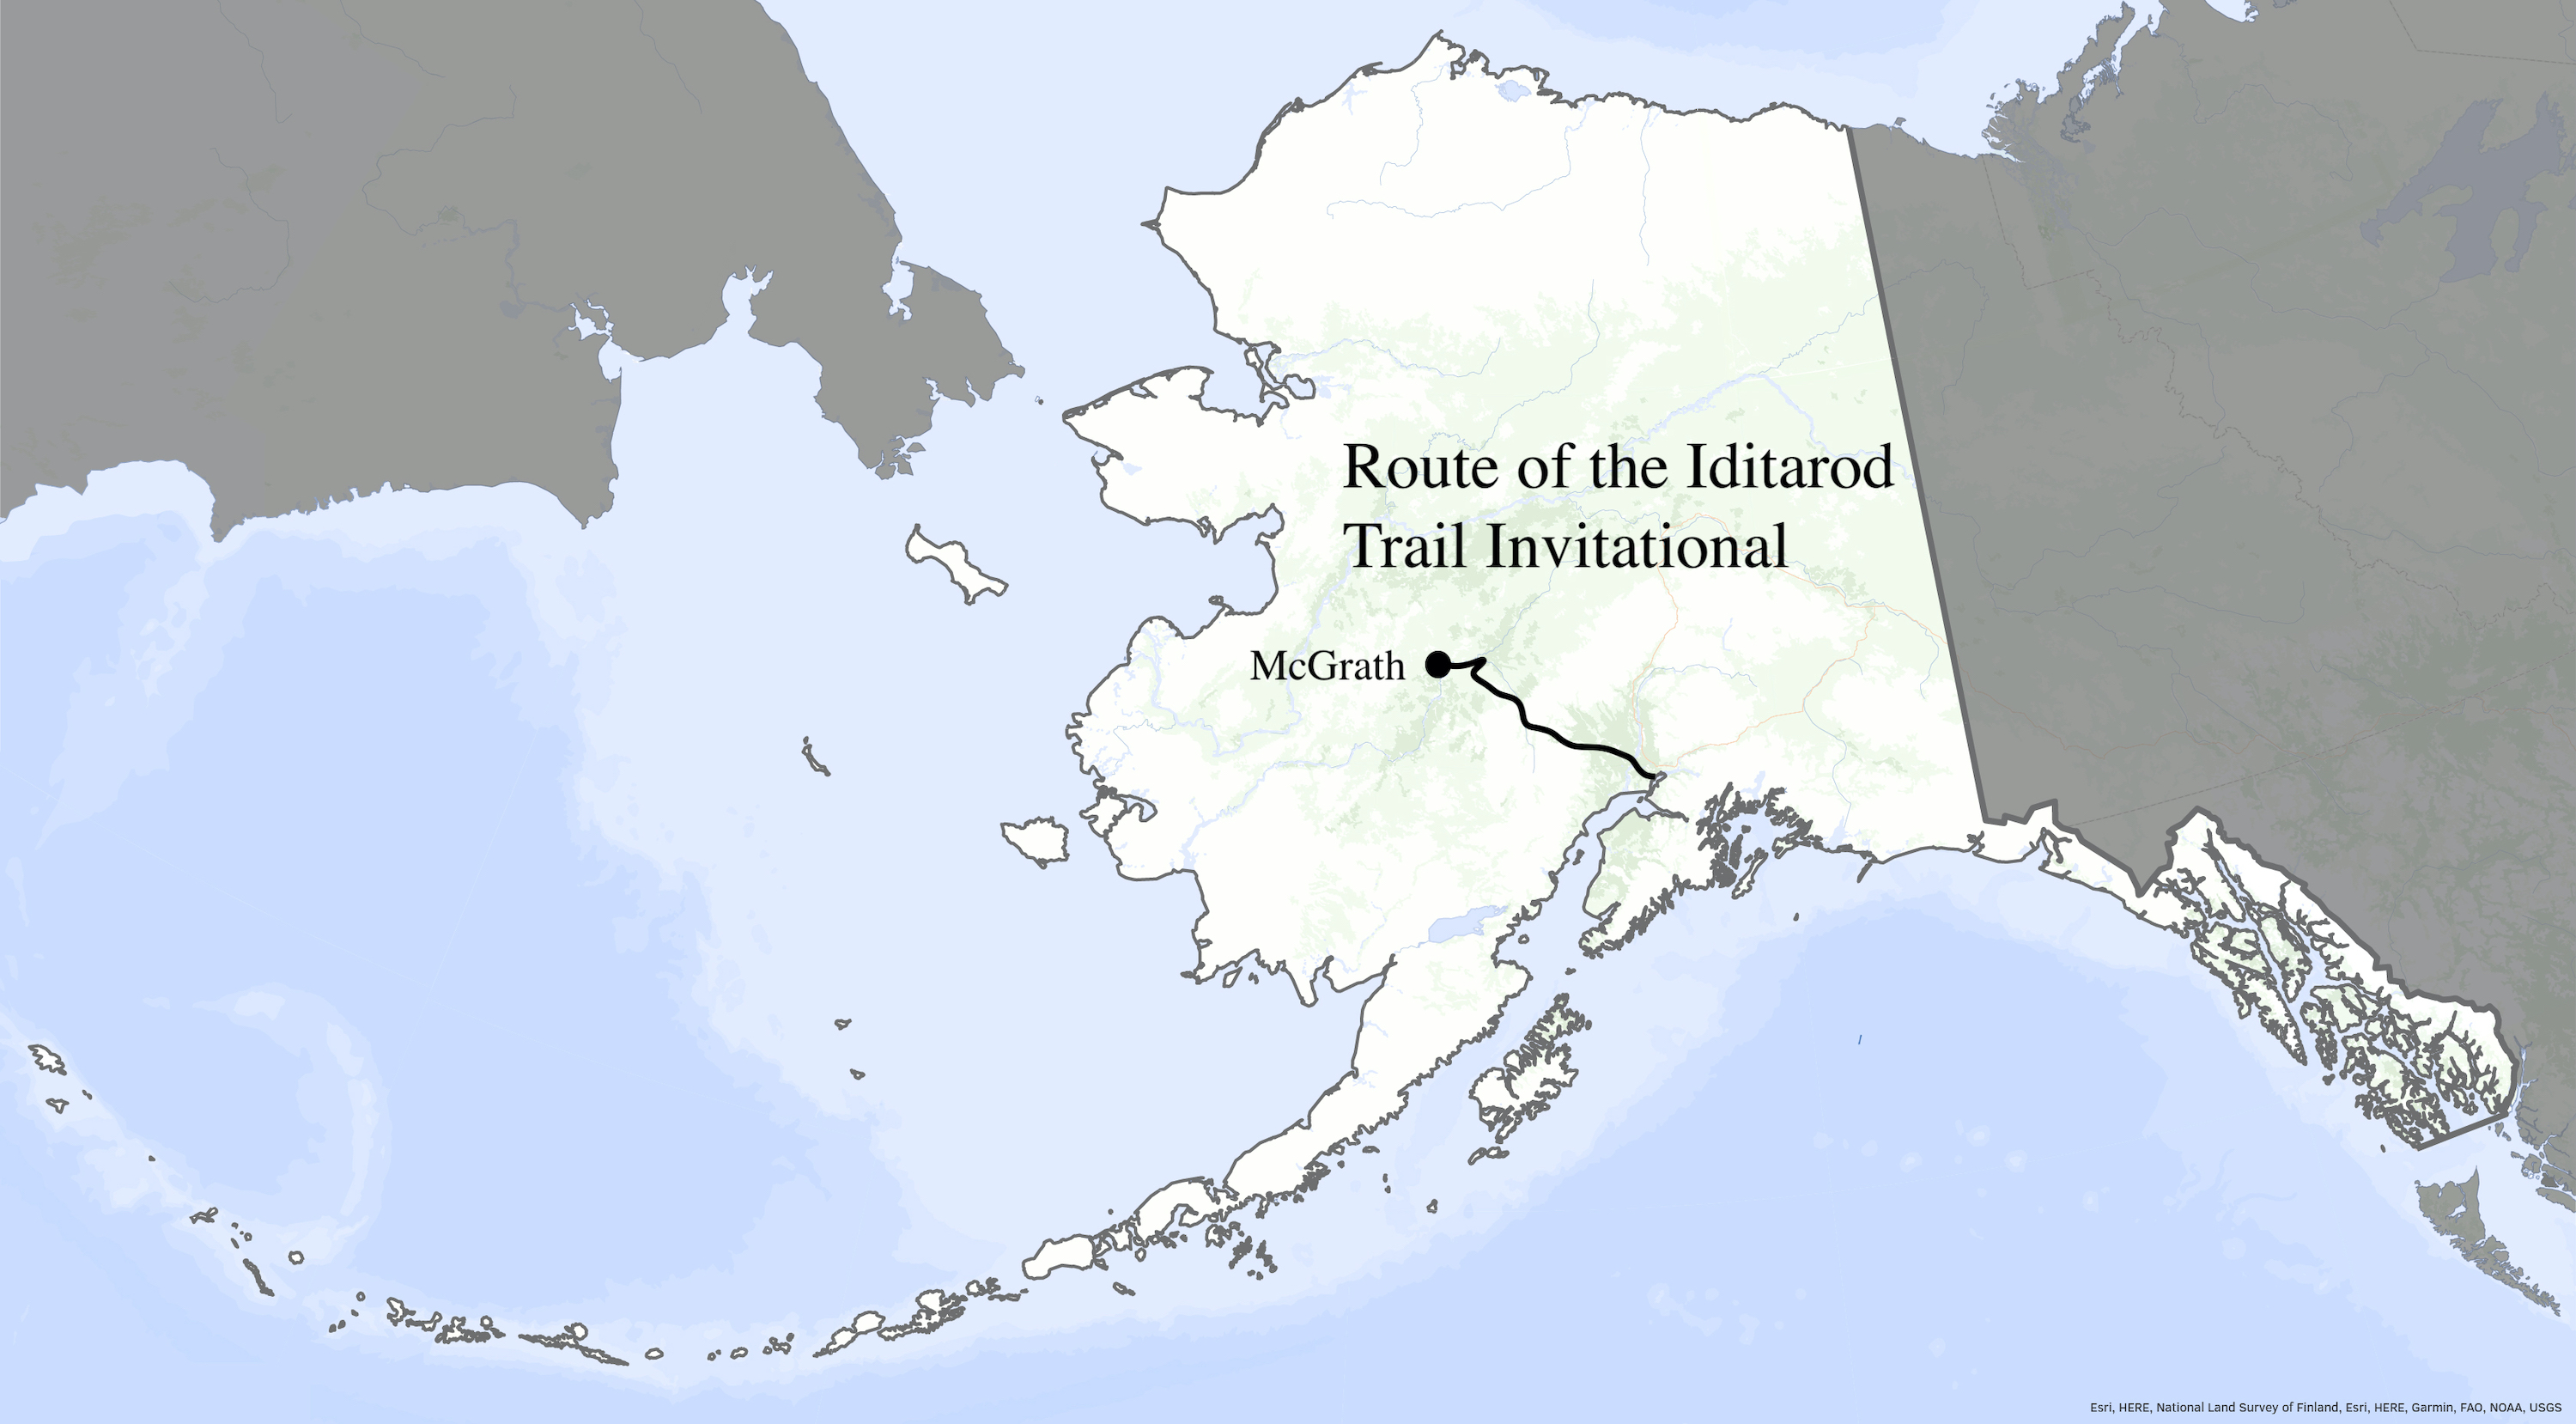 A map of Alaska features a line from Anchorage to McGrath describing the route of the Iditarod Trail Invitational race.